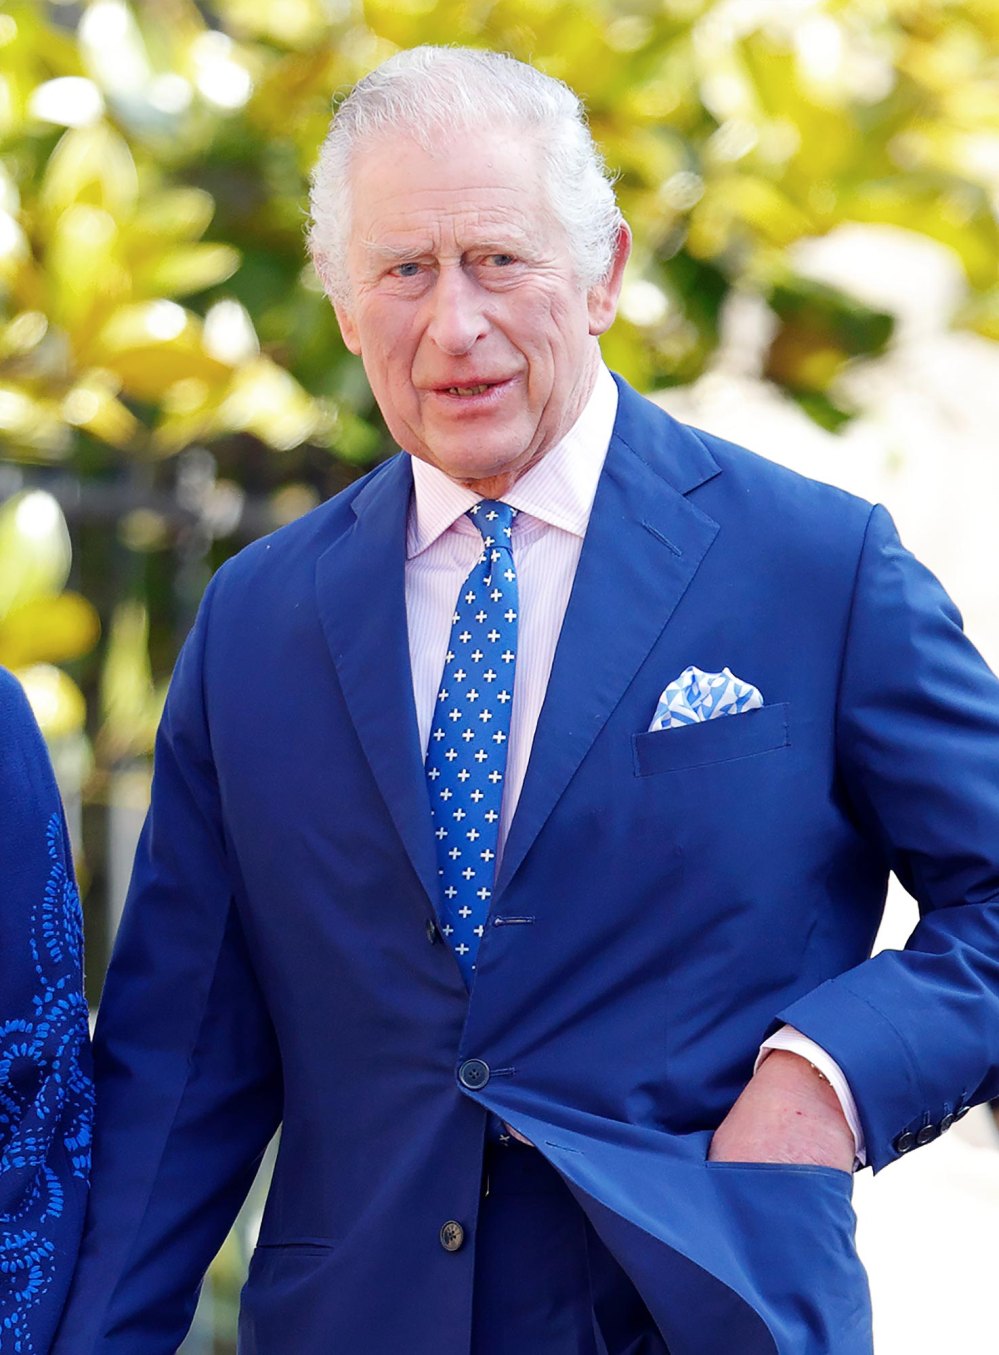 The Palace Has Been Tone Deaf Handling Princess Kate and King Charles III s Health Issues Says Expert 439 447